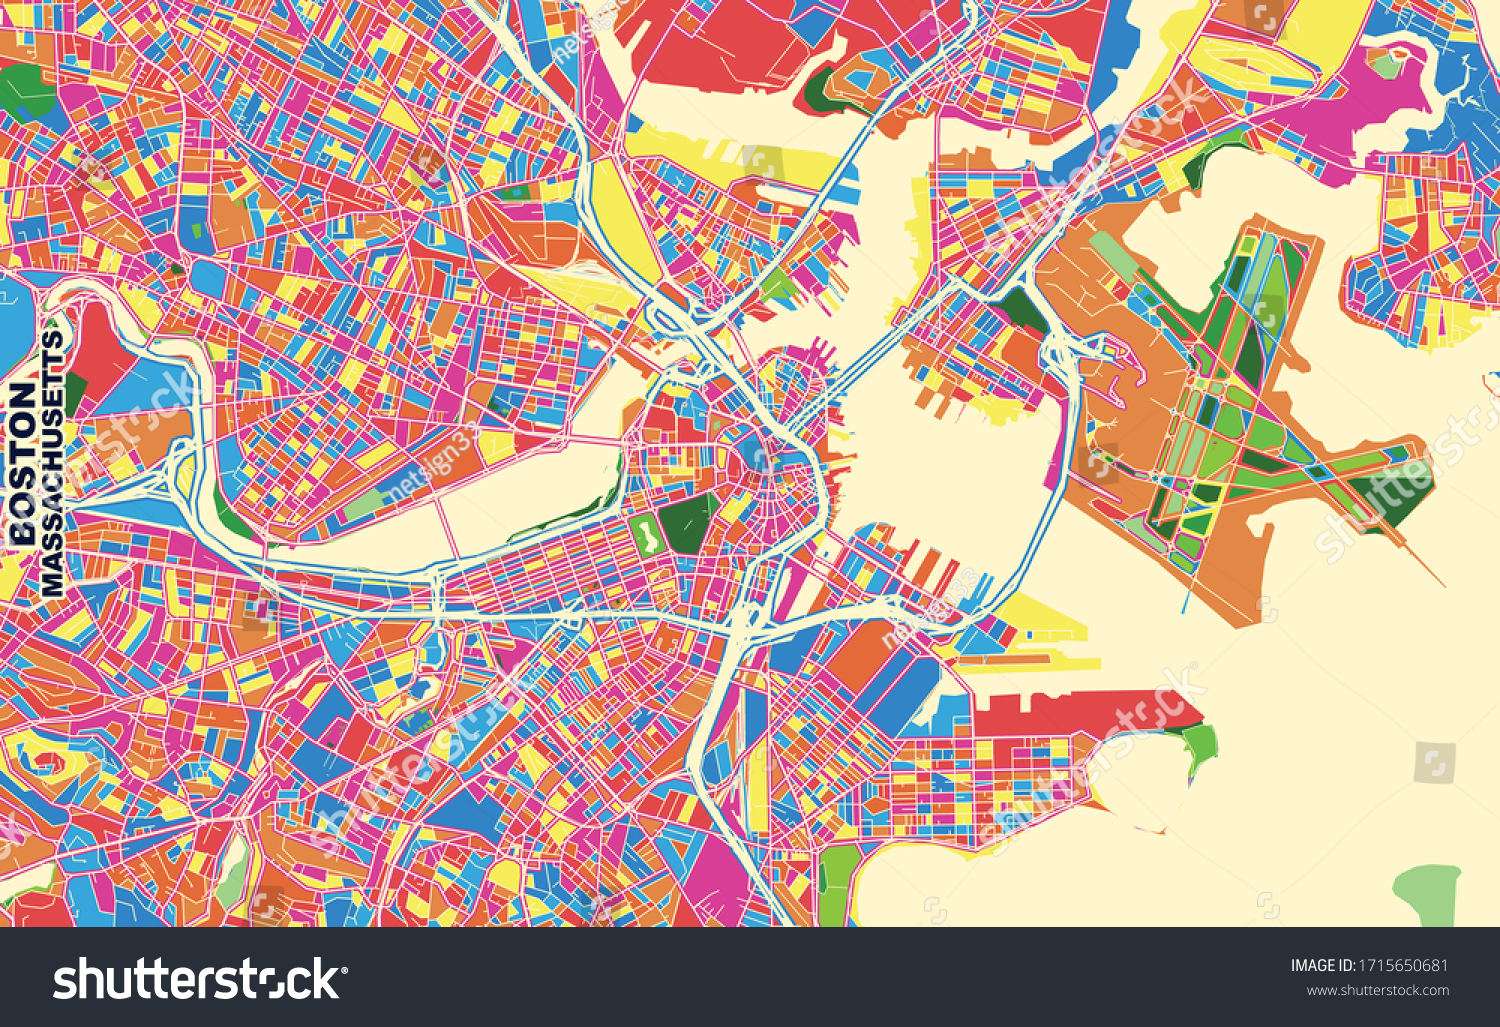 SVG of Colorful vector map of Boston, Massachusetts, U.S.A.. Art Map template for selfprinting wall art in landscape format. svg